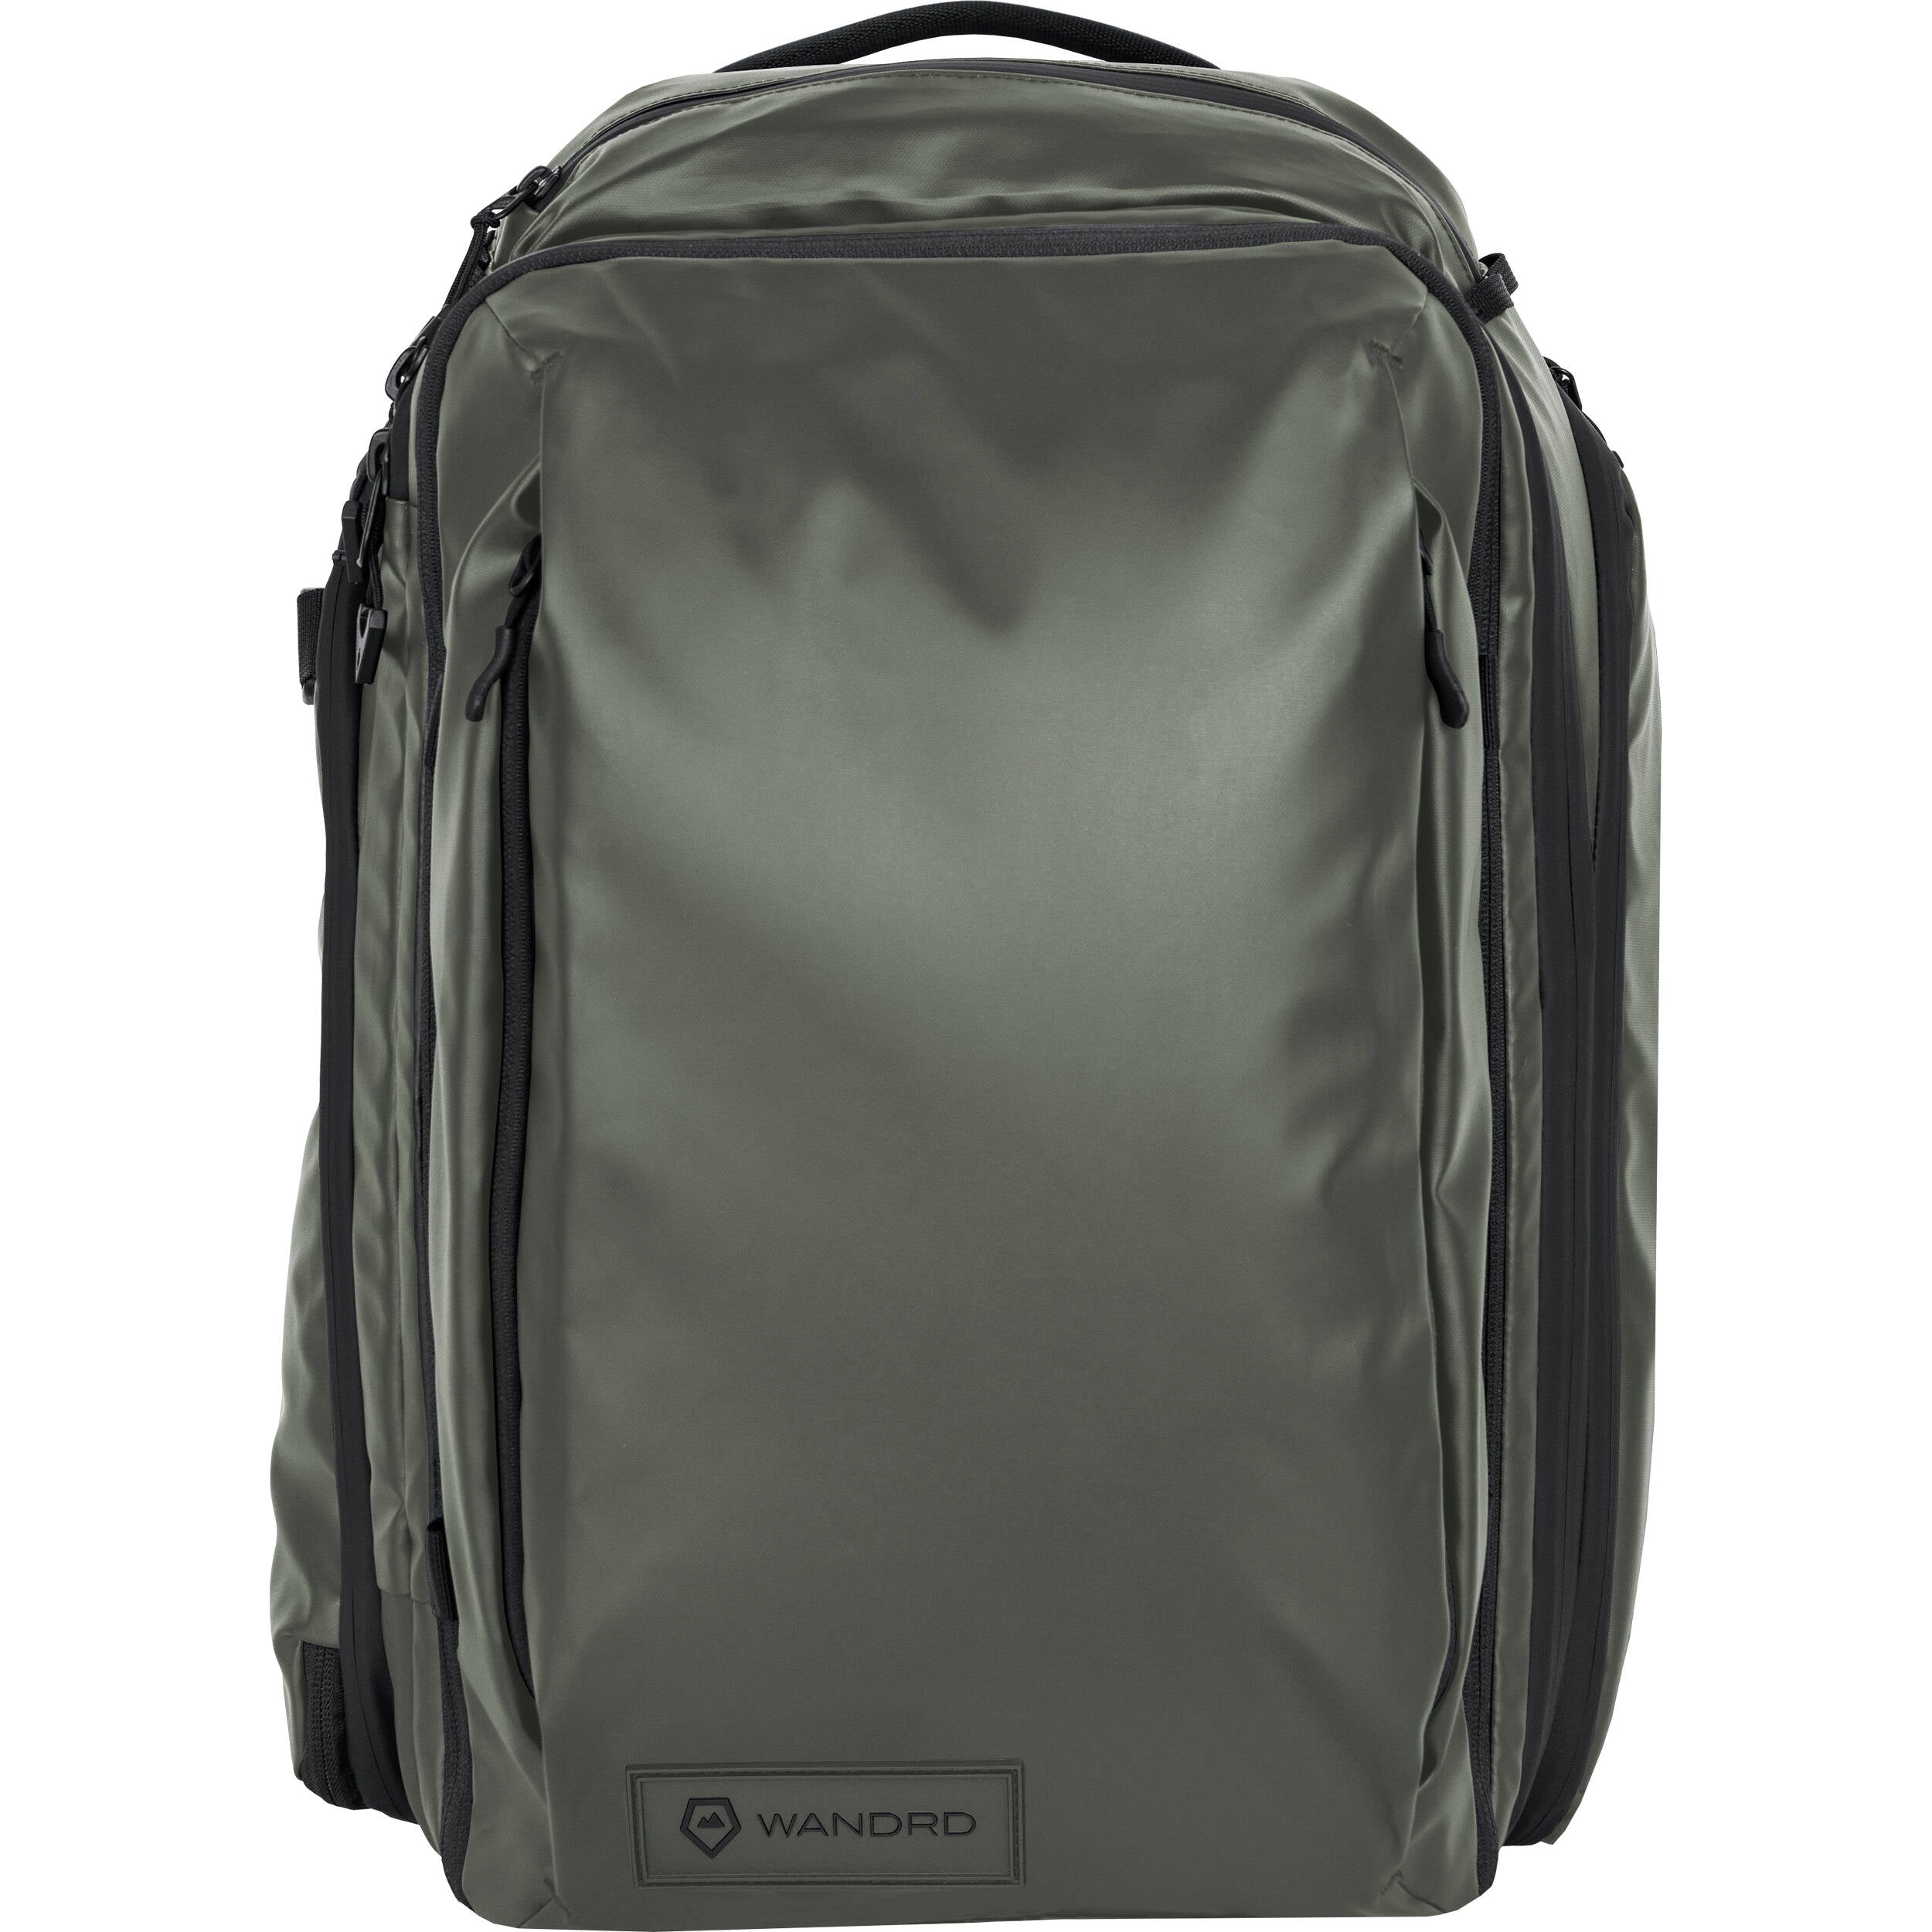 WANDRD Transit Travel Backpack - 45L - Wasatch Green